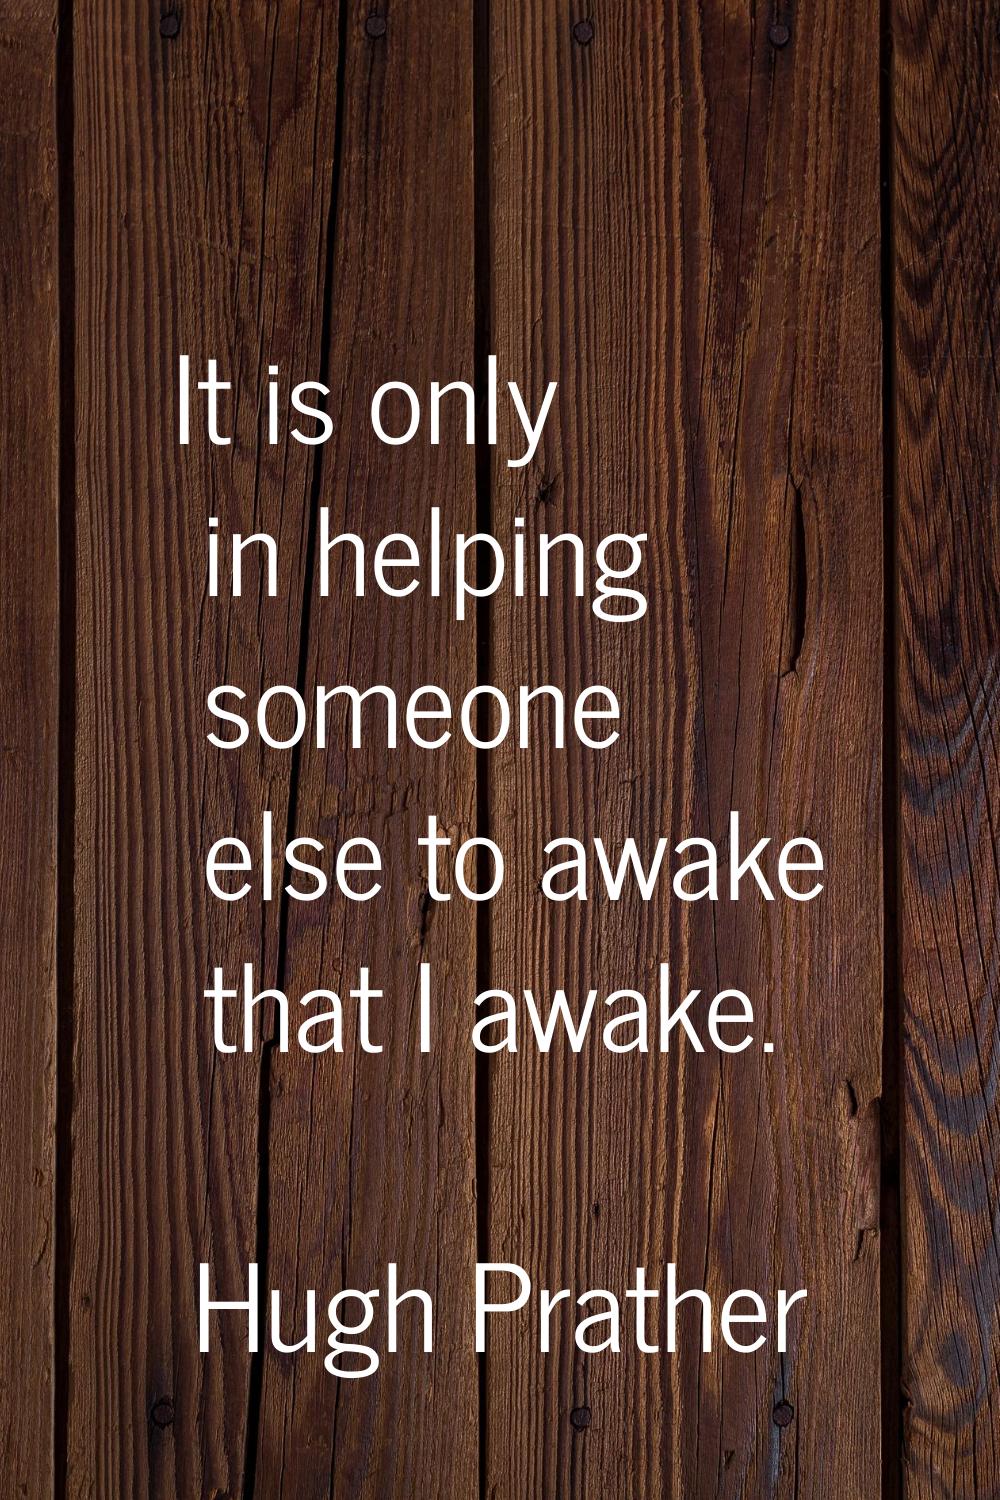 It is only in helping someone else to awake that I awake.